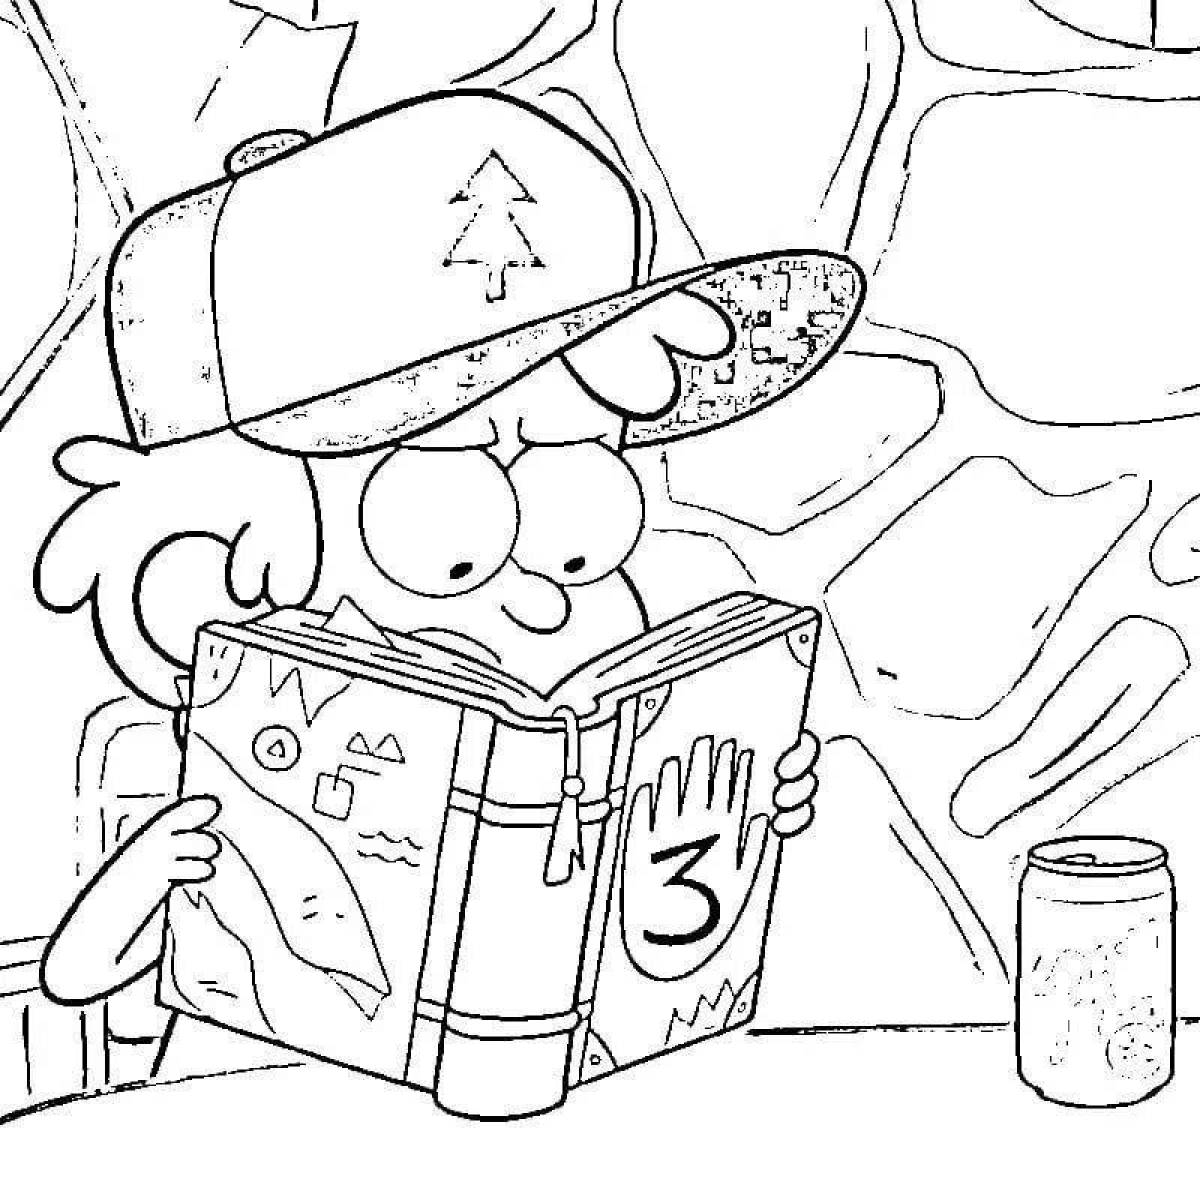 Playful gravity falls light coloring page